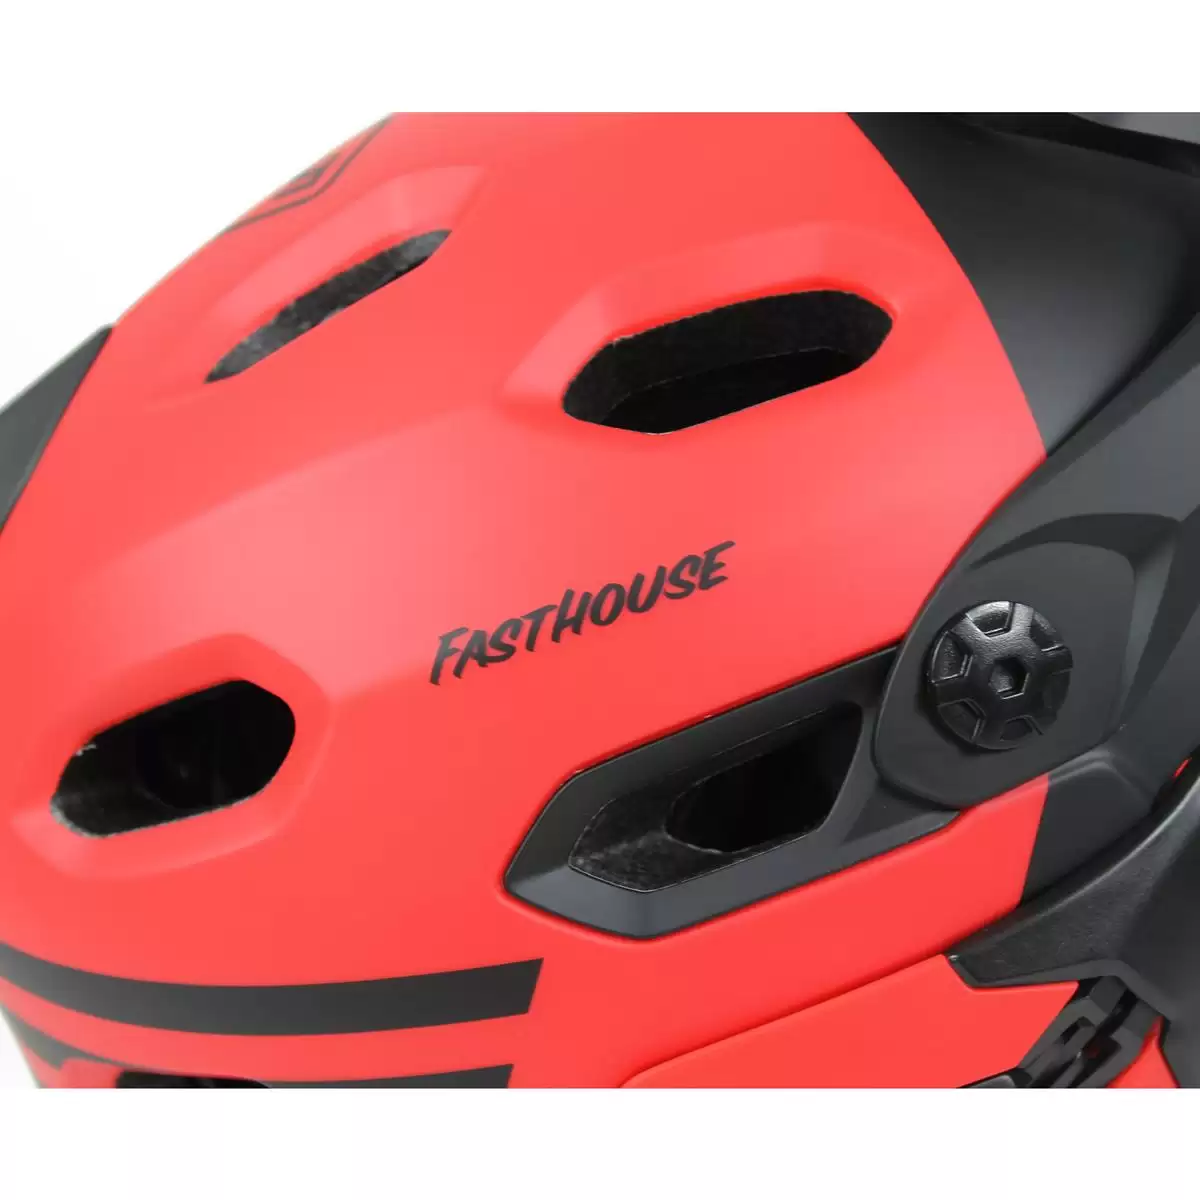 Helmet Super DH MIPS Fasthouse Red Size M (55-59cm) #5